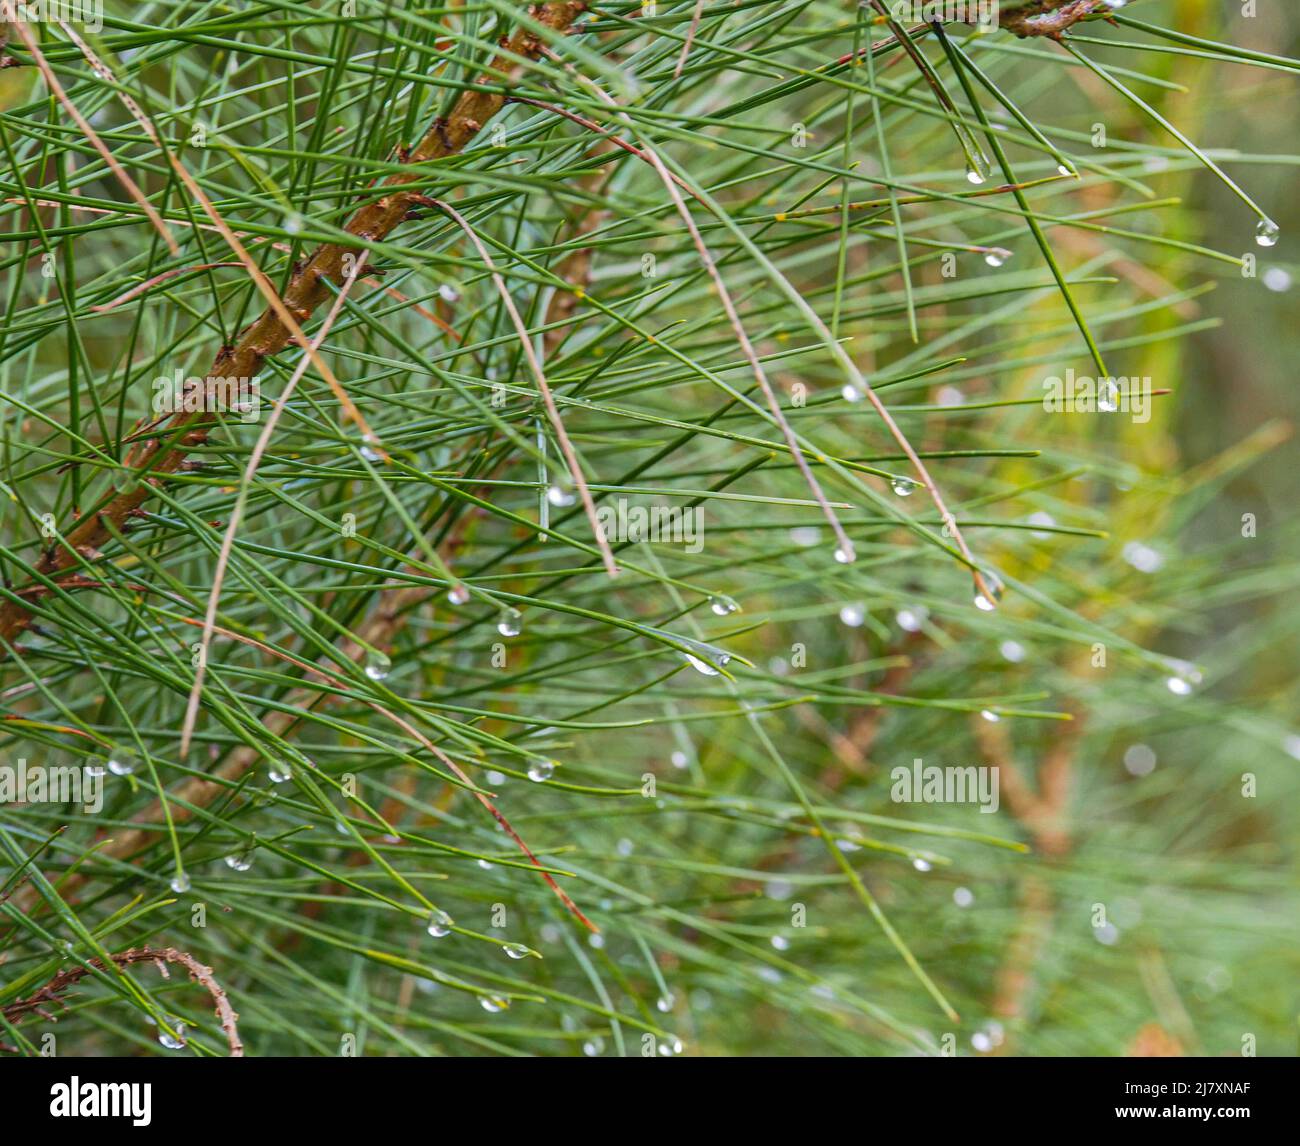 Spruce branches with drops after rain Stock Photo